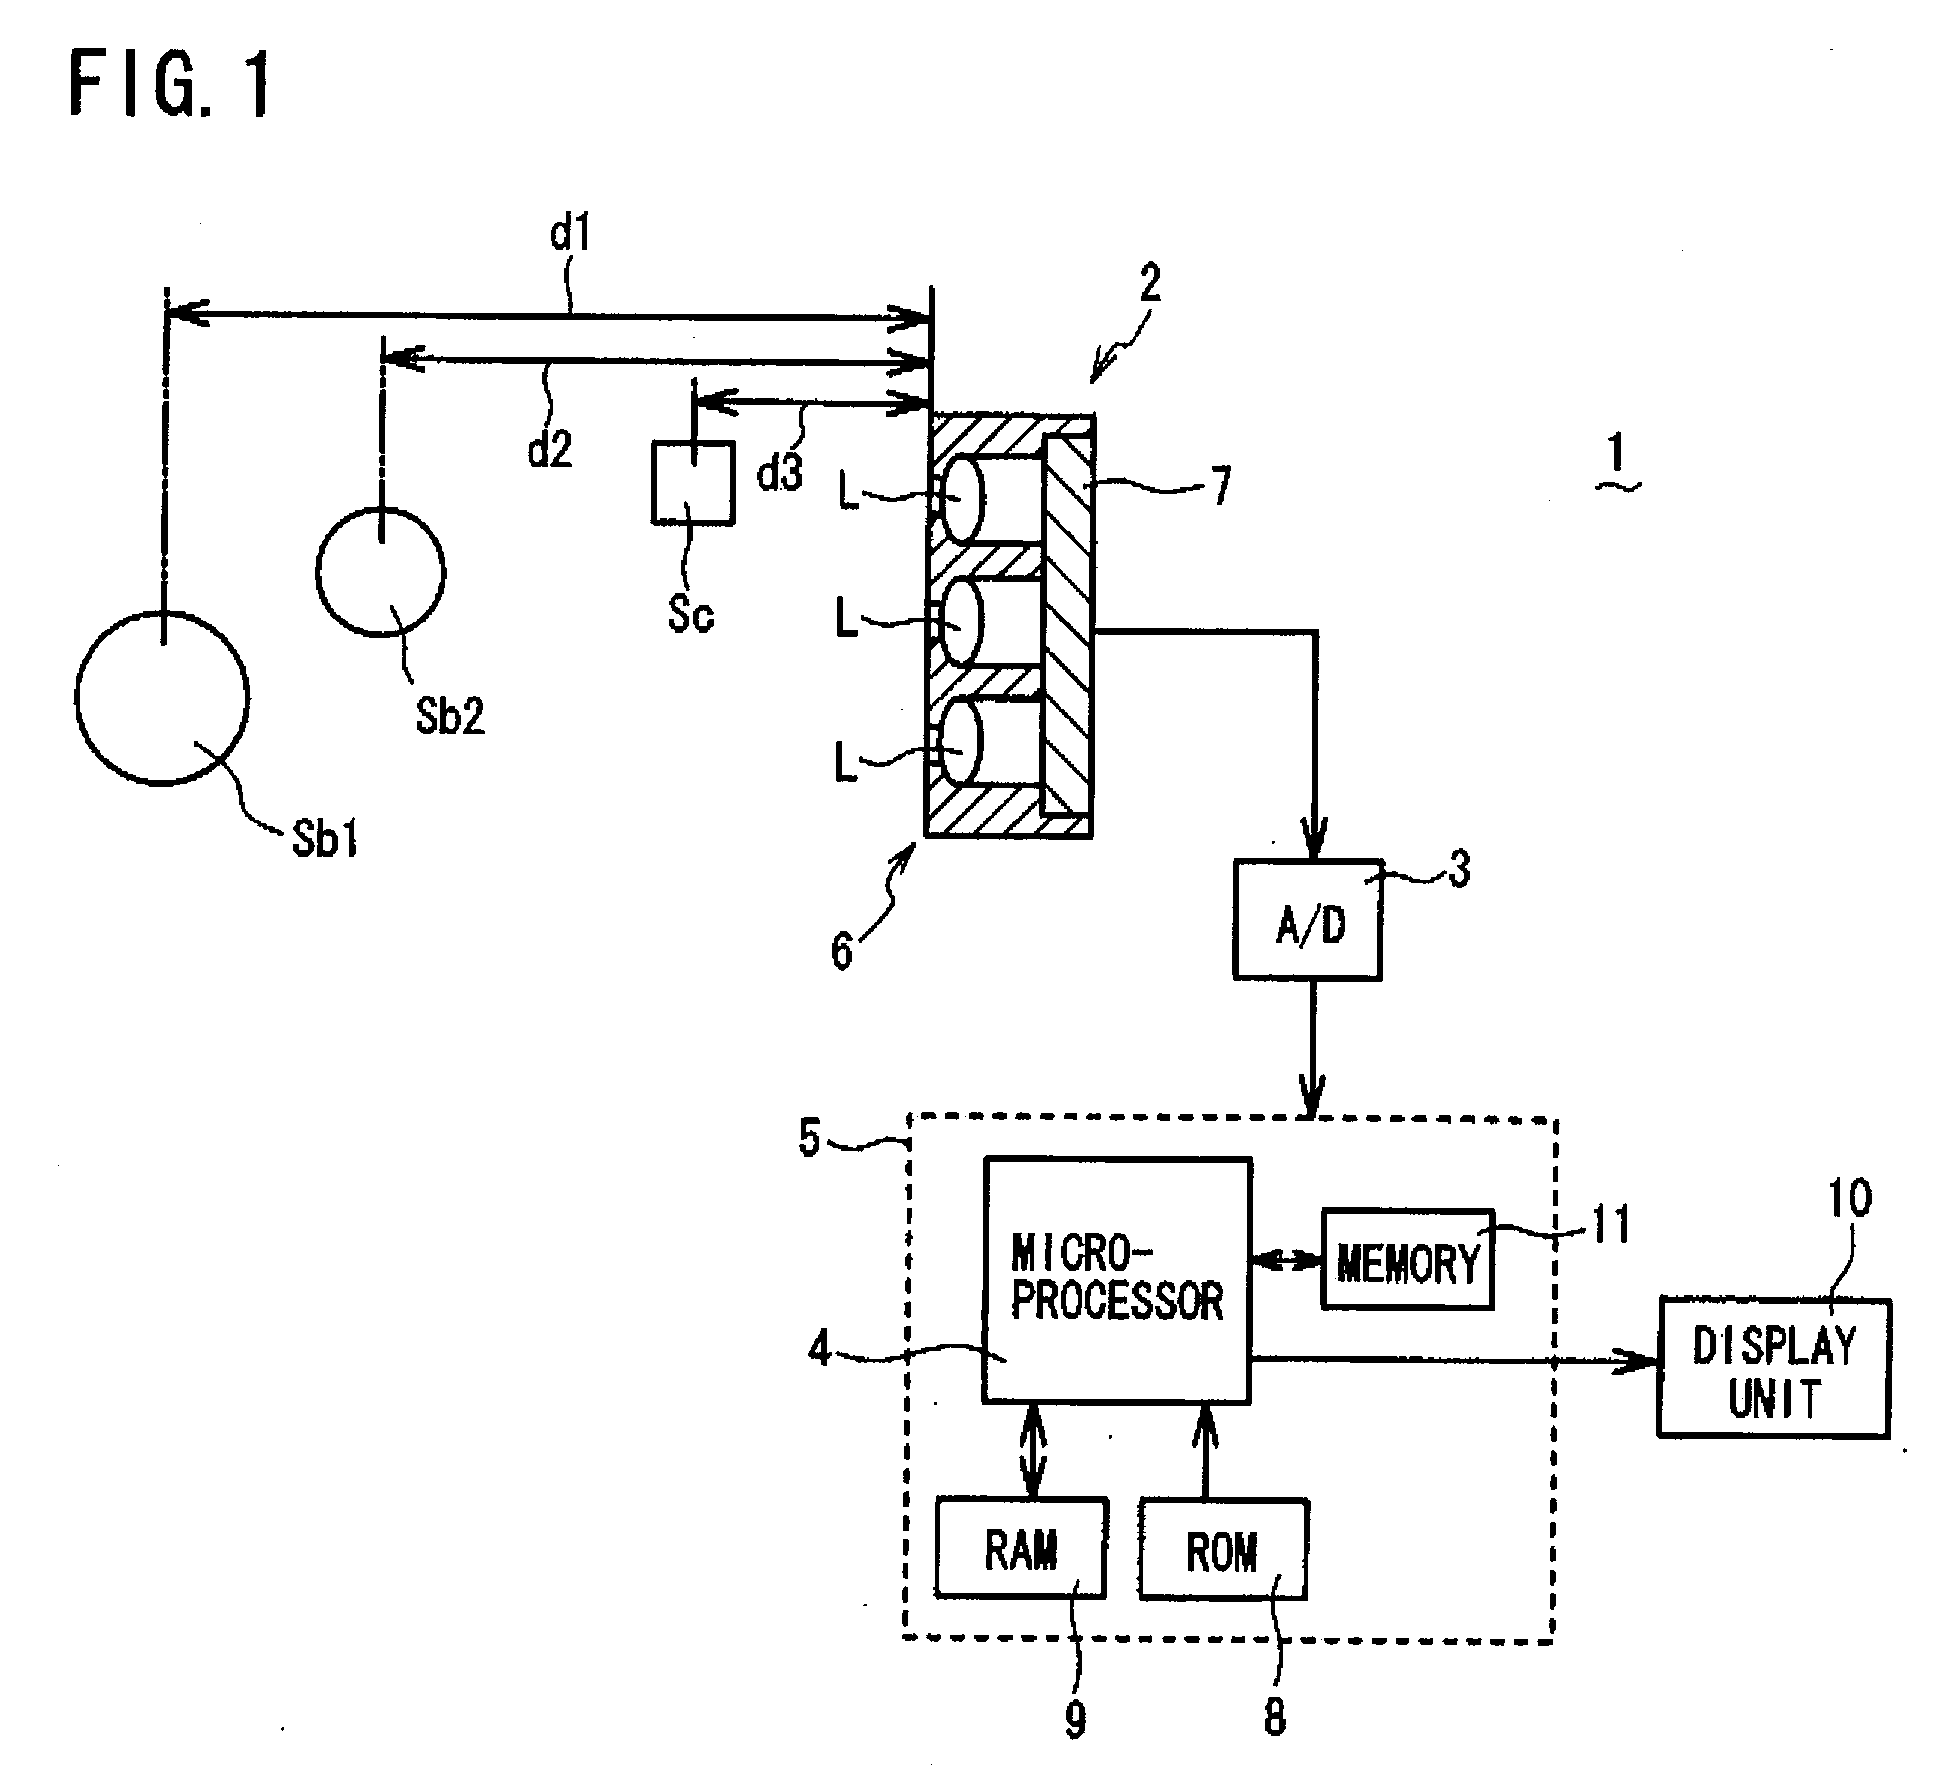 Three-Dimensional Object Imaging Device